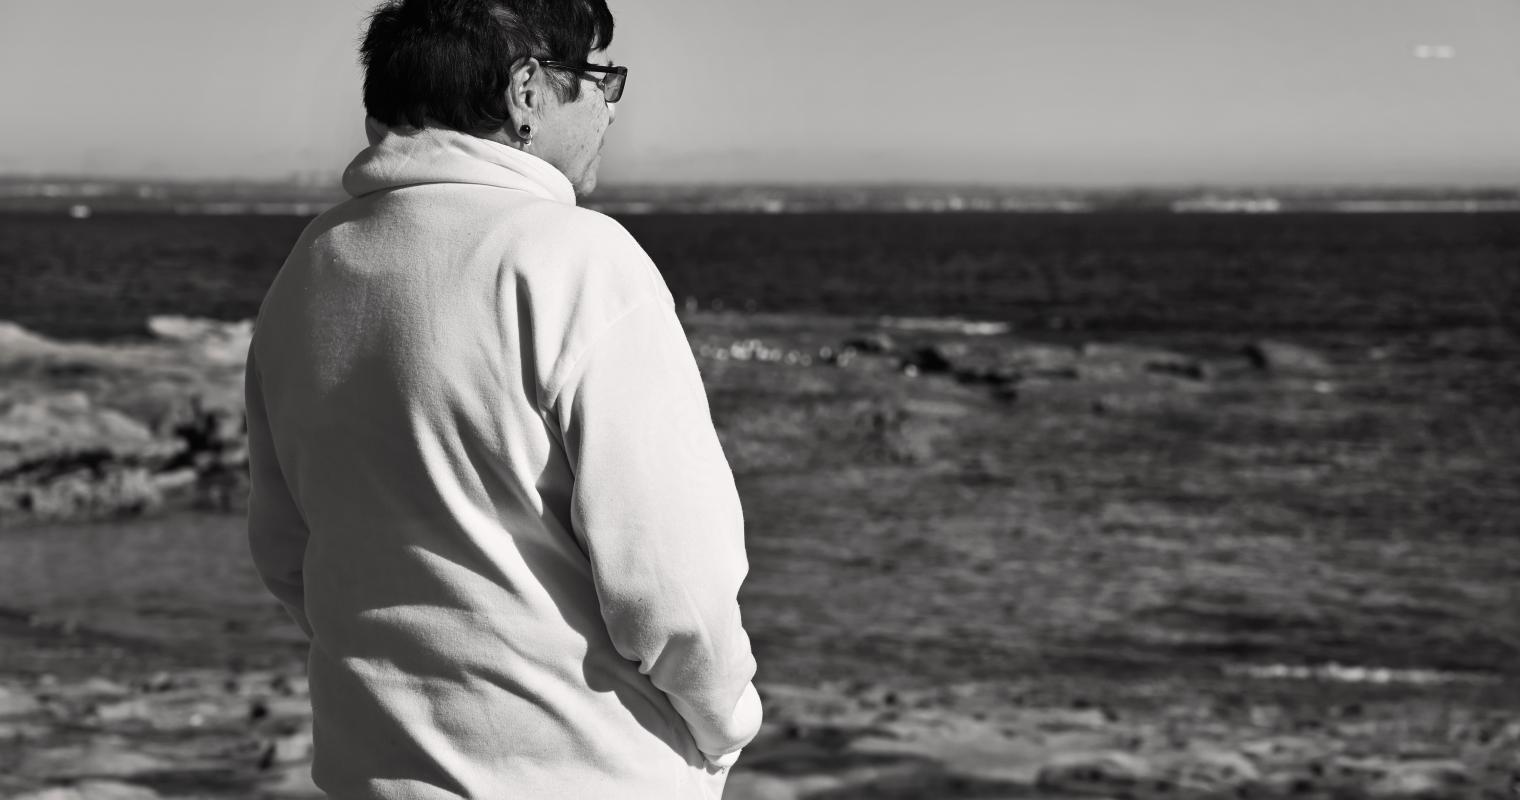 image of a person on the beach looking at water